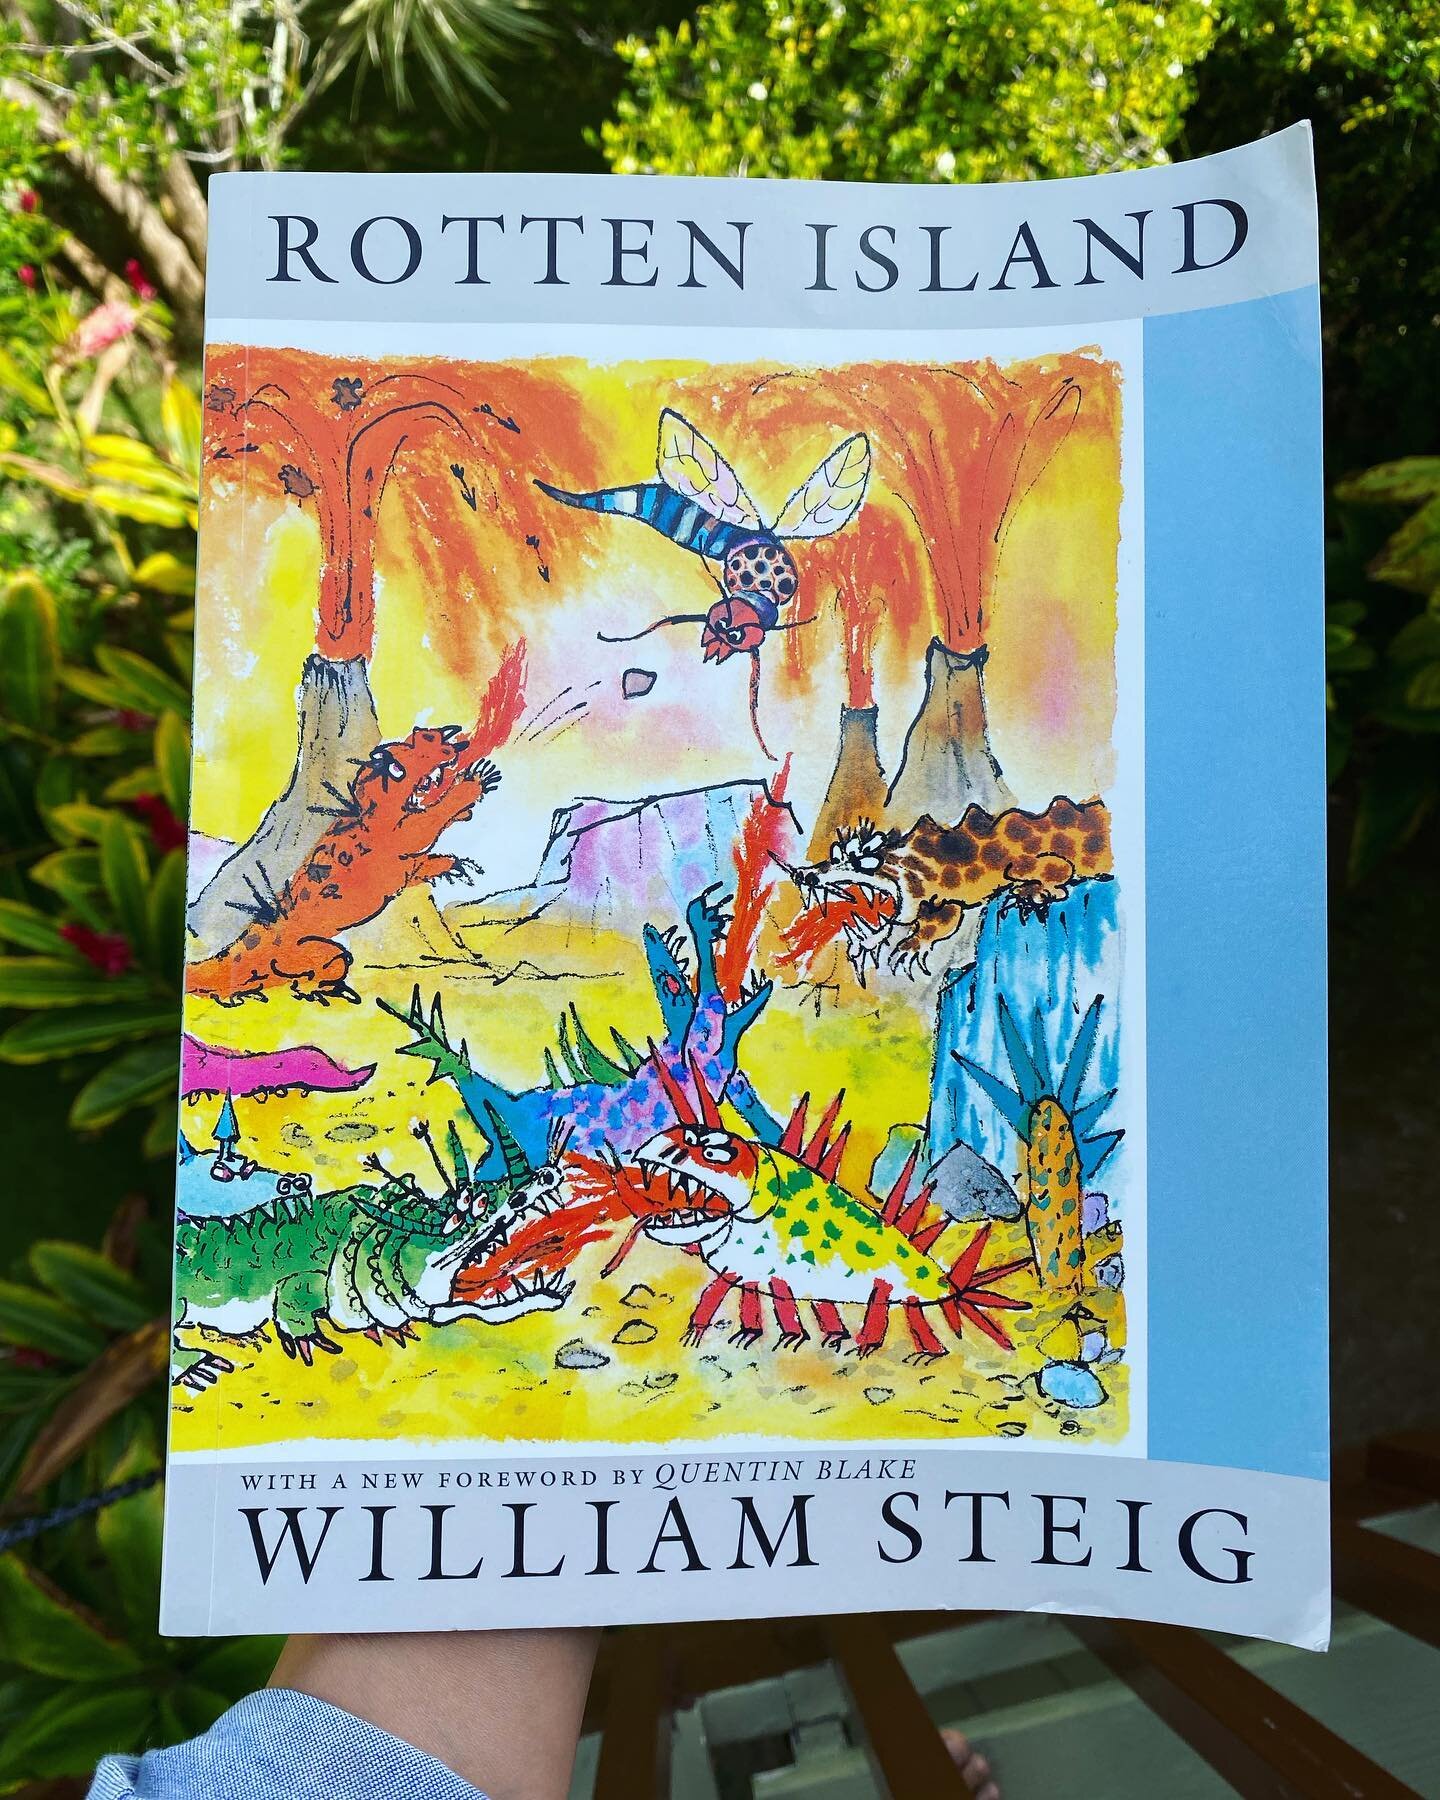 My mom was a humongous fan of William Steig and there was no children&rsquo;s book creator whose books we consumed with more ferocity. But I didn&rsquo;t discover Rotten Island until in my late twenties, a parable-like story about an island of terrib